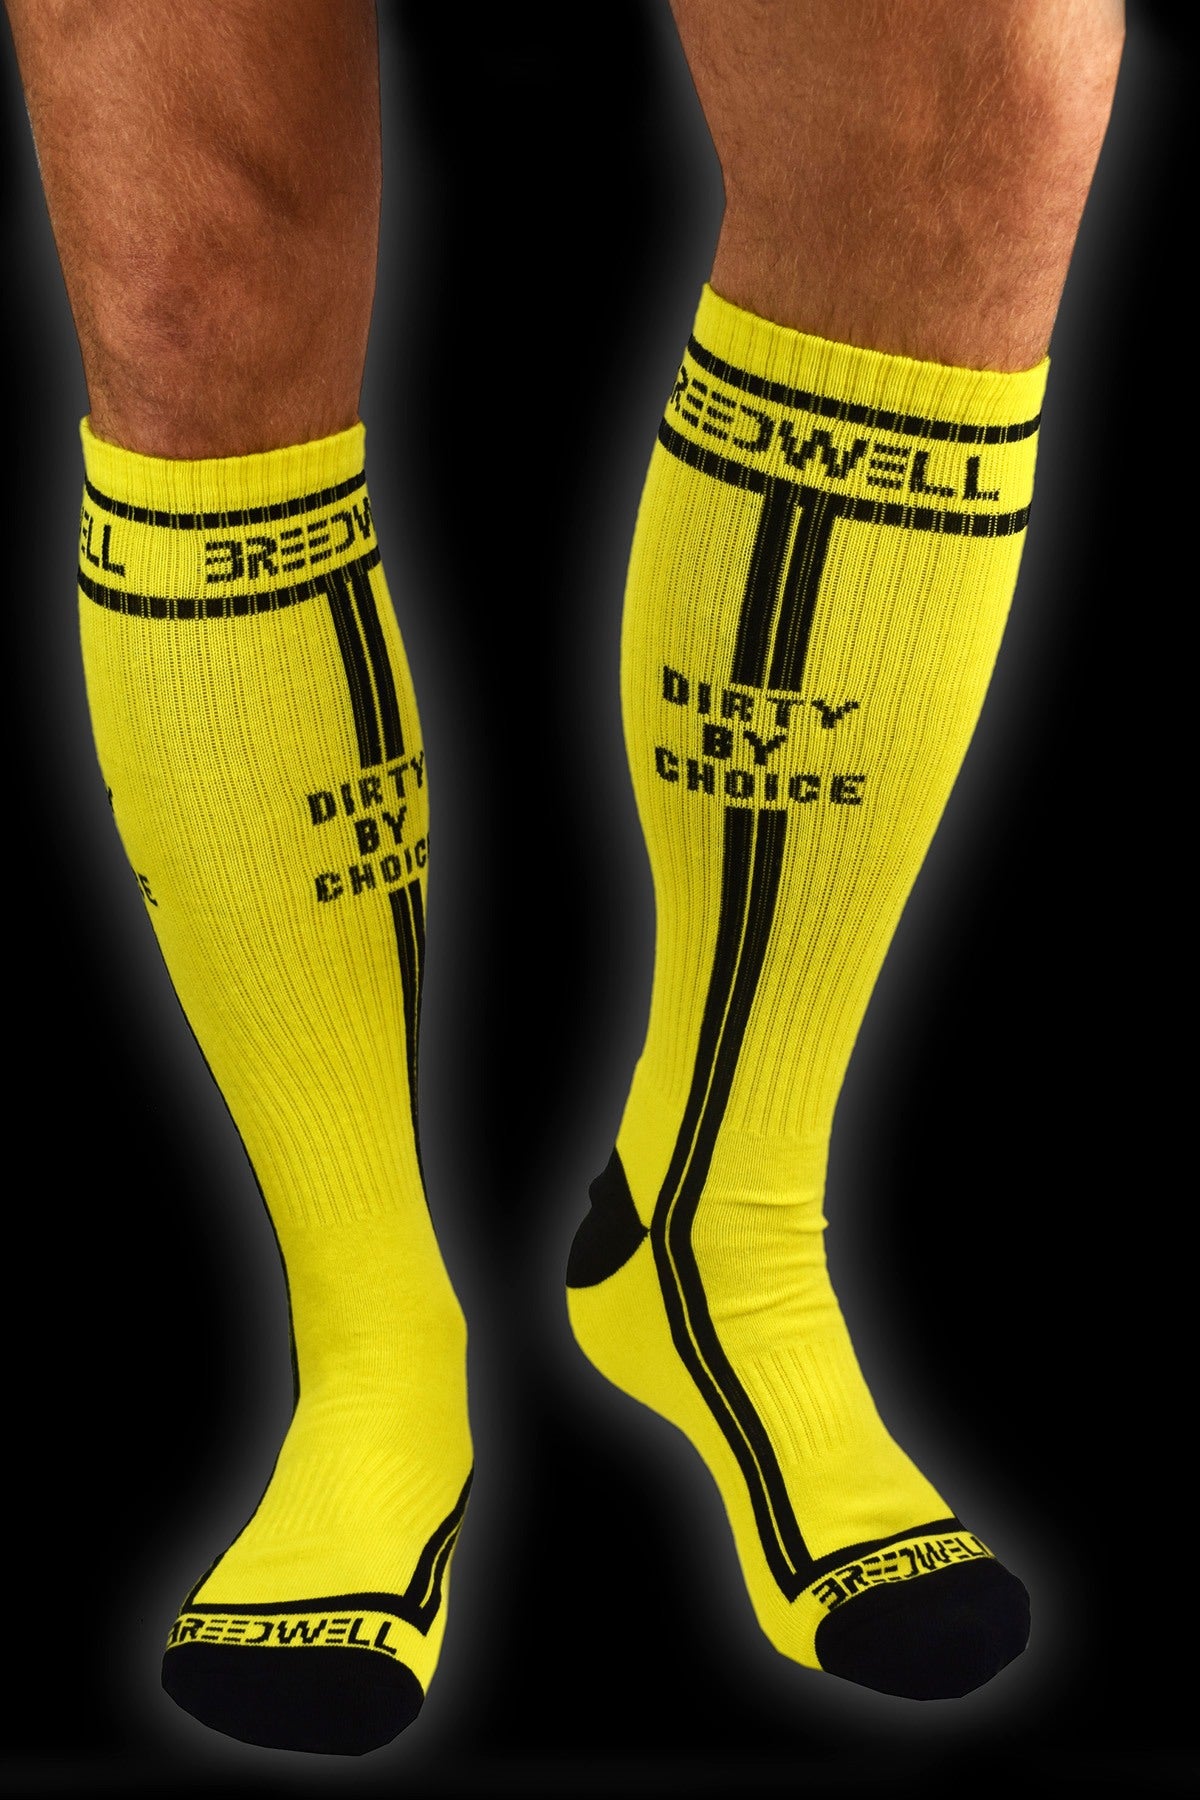 Breedwell Yellow 'Dirty by Choice' Socks